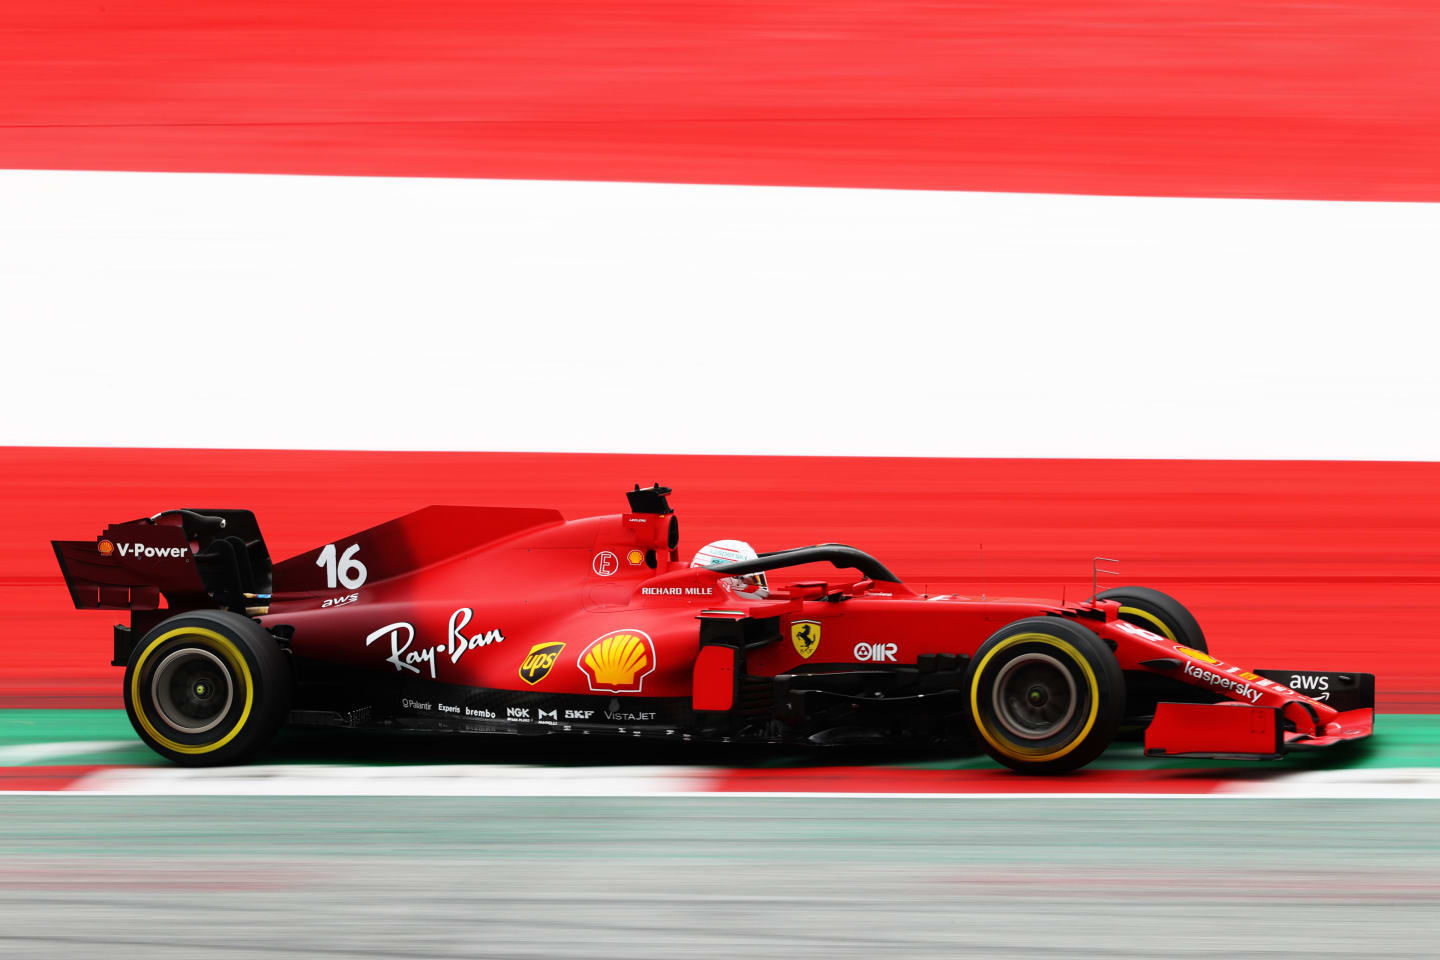 SPIELBERG, AUSTRIA - JULY 02: Charles Leclerc of Monaco driving the (16) Scuderia Ferrari SF21 during practice ahead of the F1 Grand Prix of Austria at Red Bull Ring on July 02, 2021 in Spielberg, Austria. (Photo by Clive Rose/Getty Images)